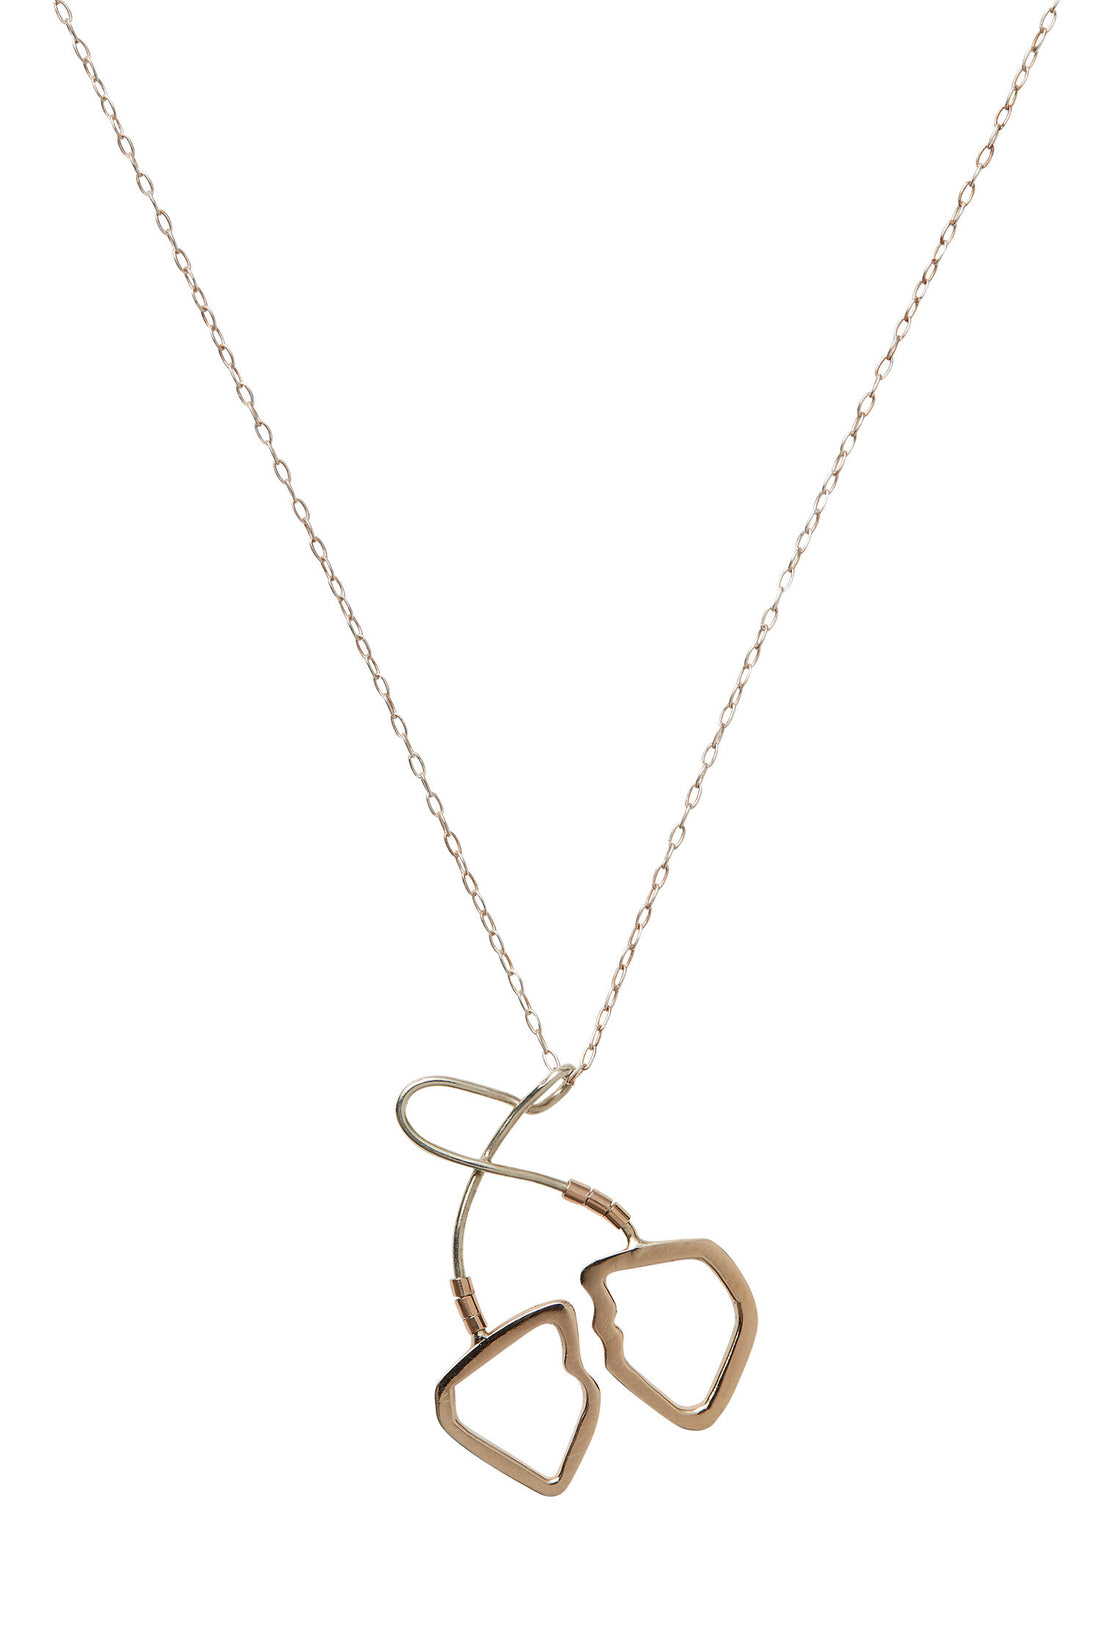 Entwined Lovers Necklace - Venice Jewellery